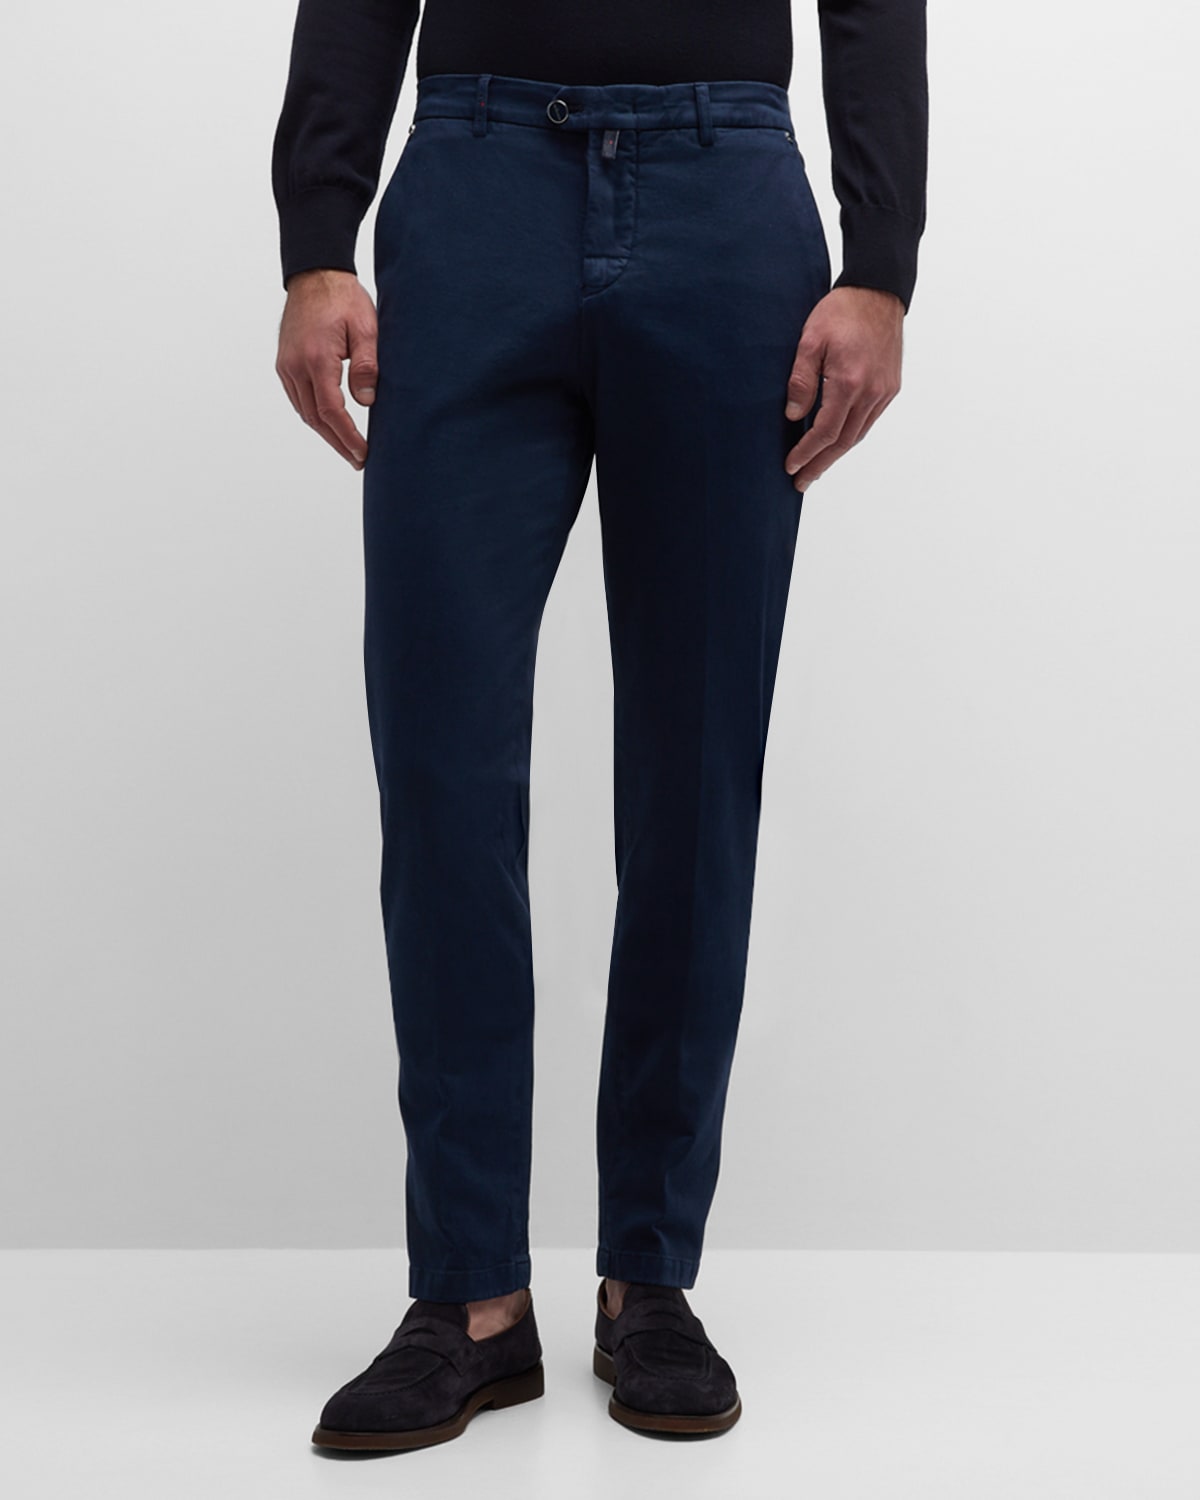 Kiton Men's Slim-fit Flat-front Trousers In Navy